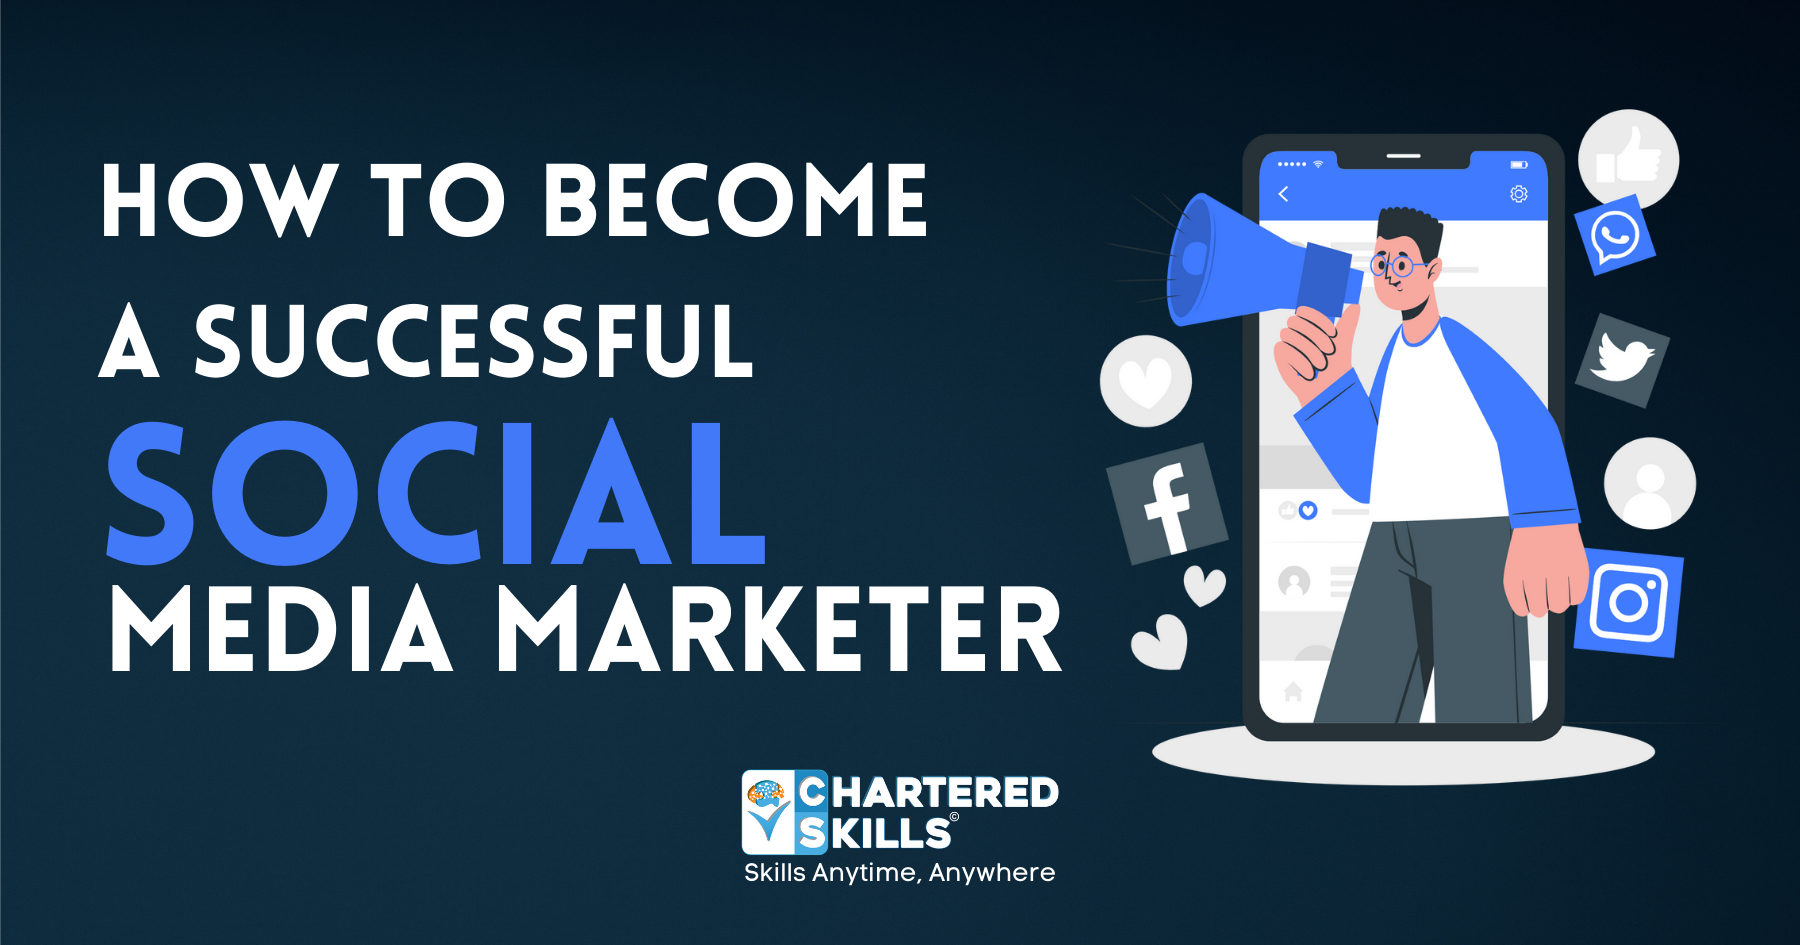 How to become a successful Social Media Marketer